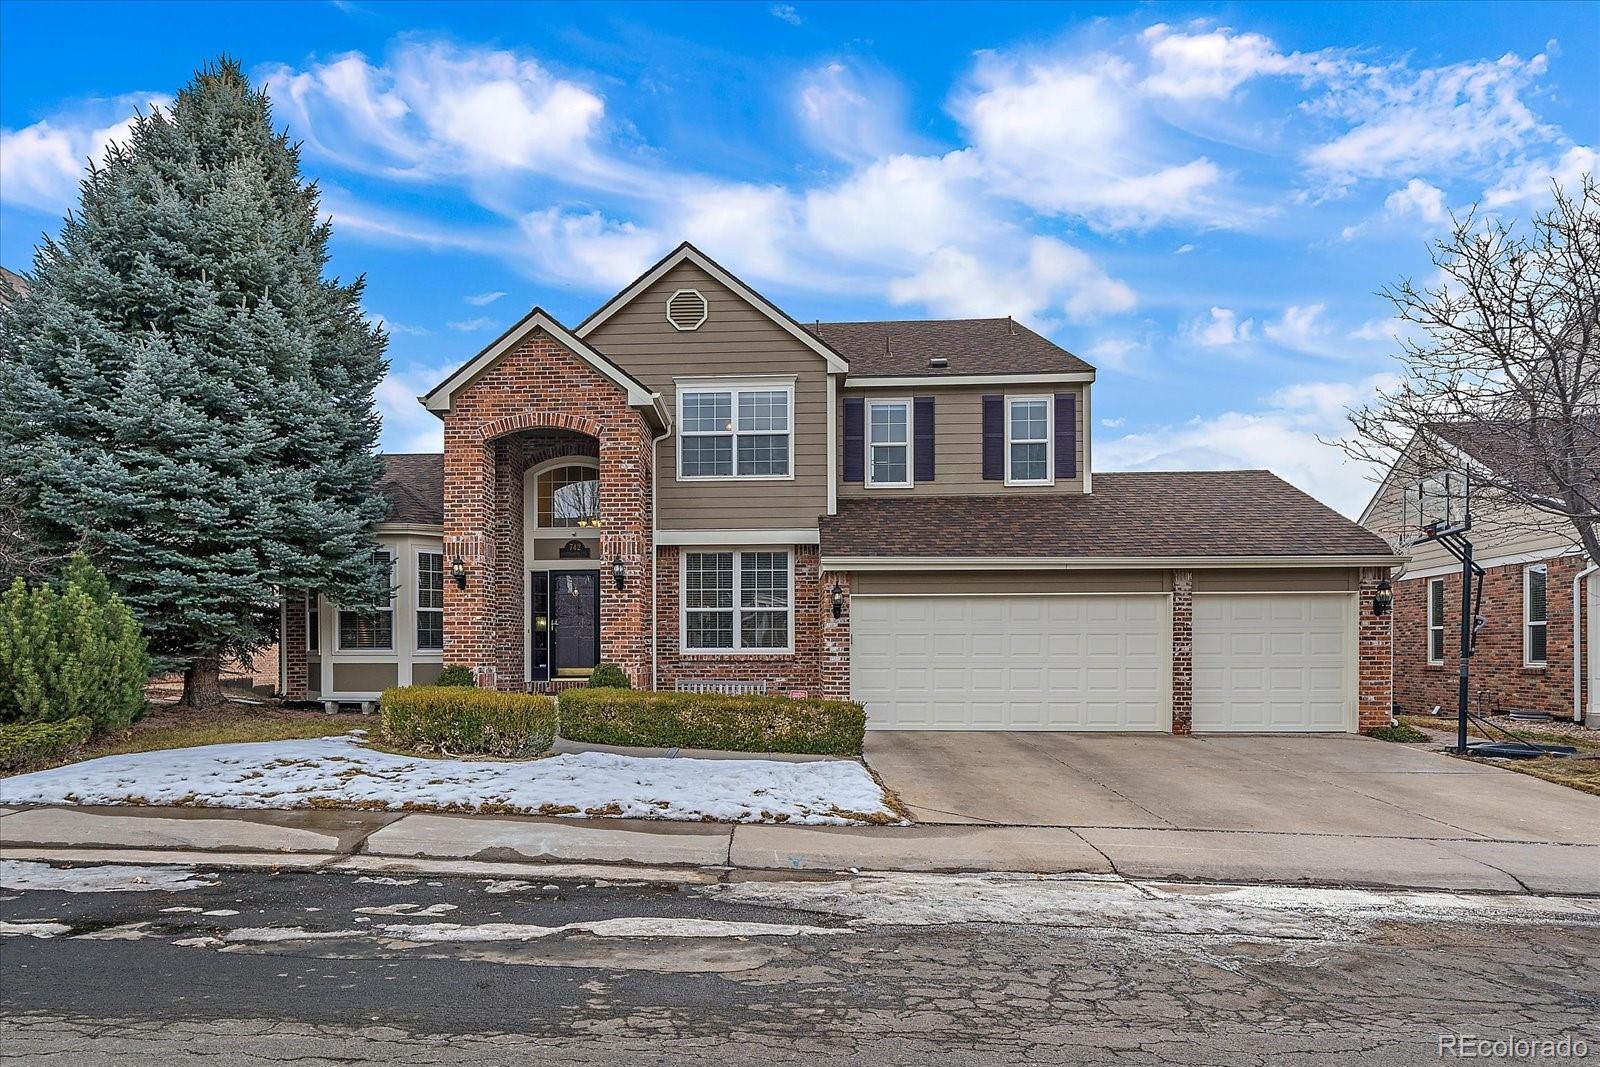 742  countrybriar lane, Highlands Ranch sold home. Closed on 2024-03-28 for $1,350,000.